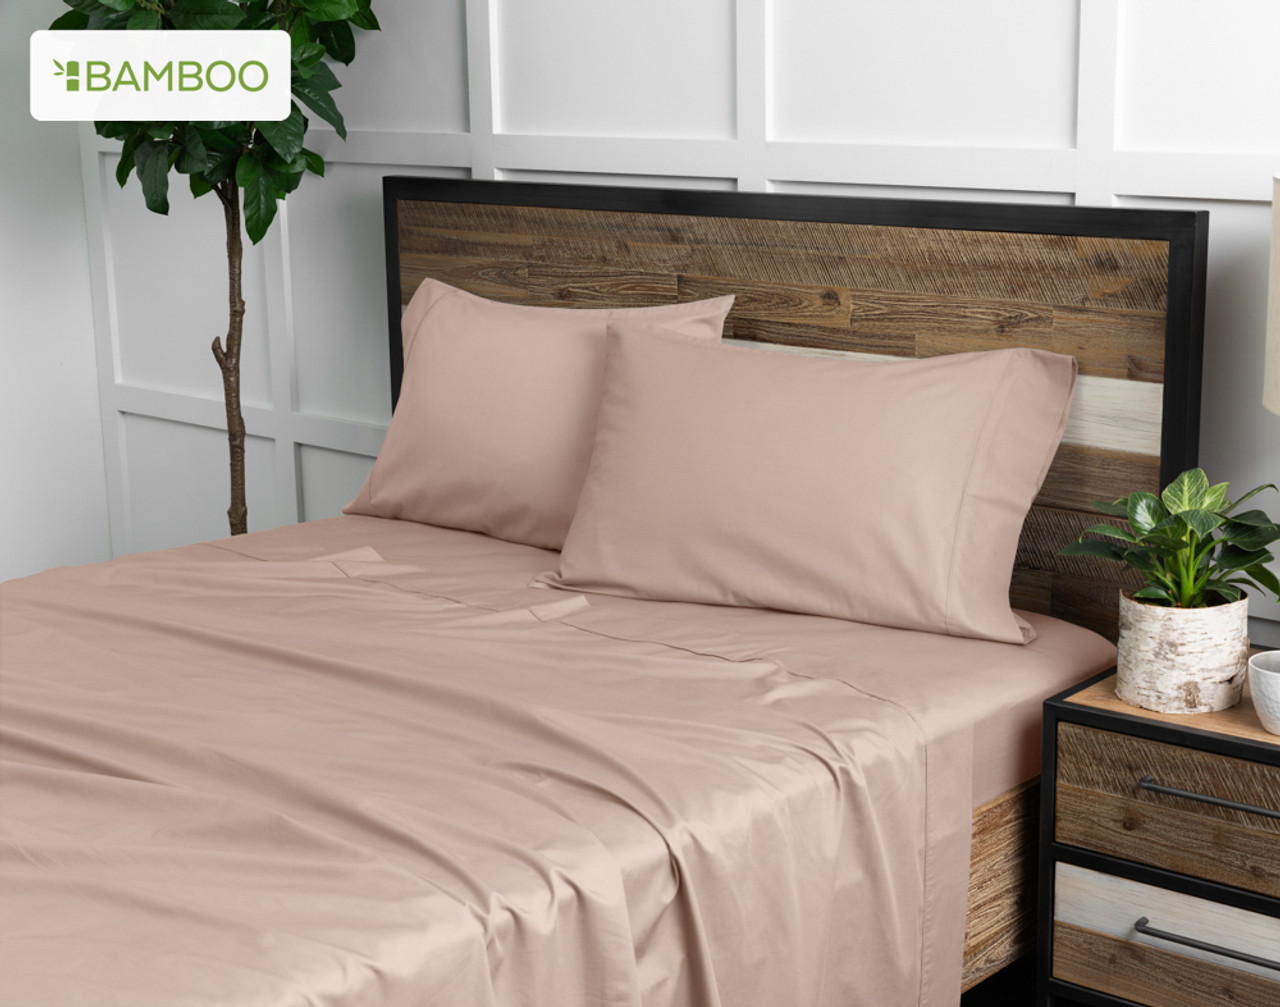 Angled view of our Bamboo Cotton Sheet Set in Frosted Berry dressed over a wooden bed in a white plant-filled bedroom.